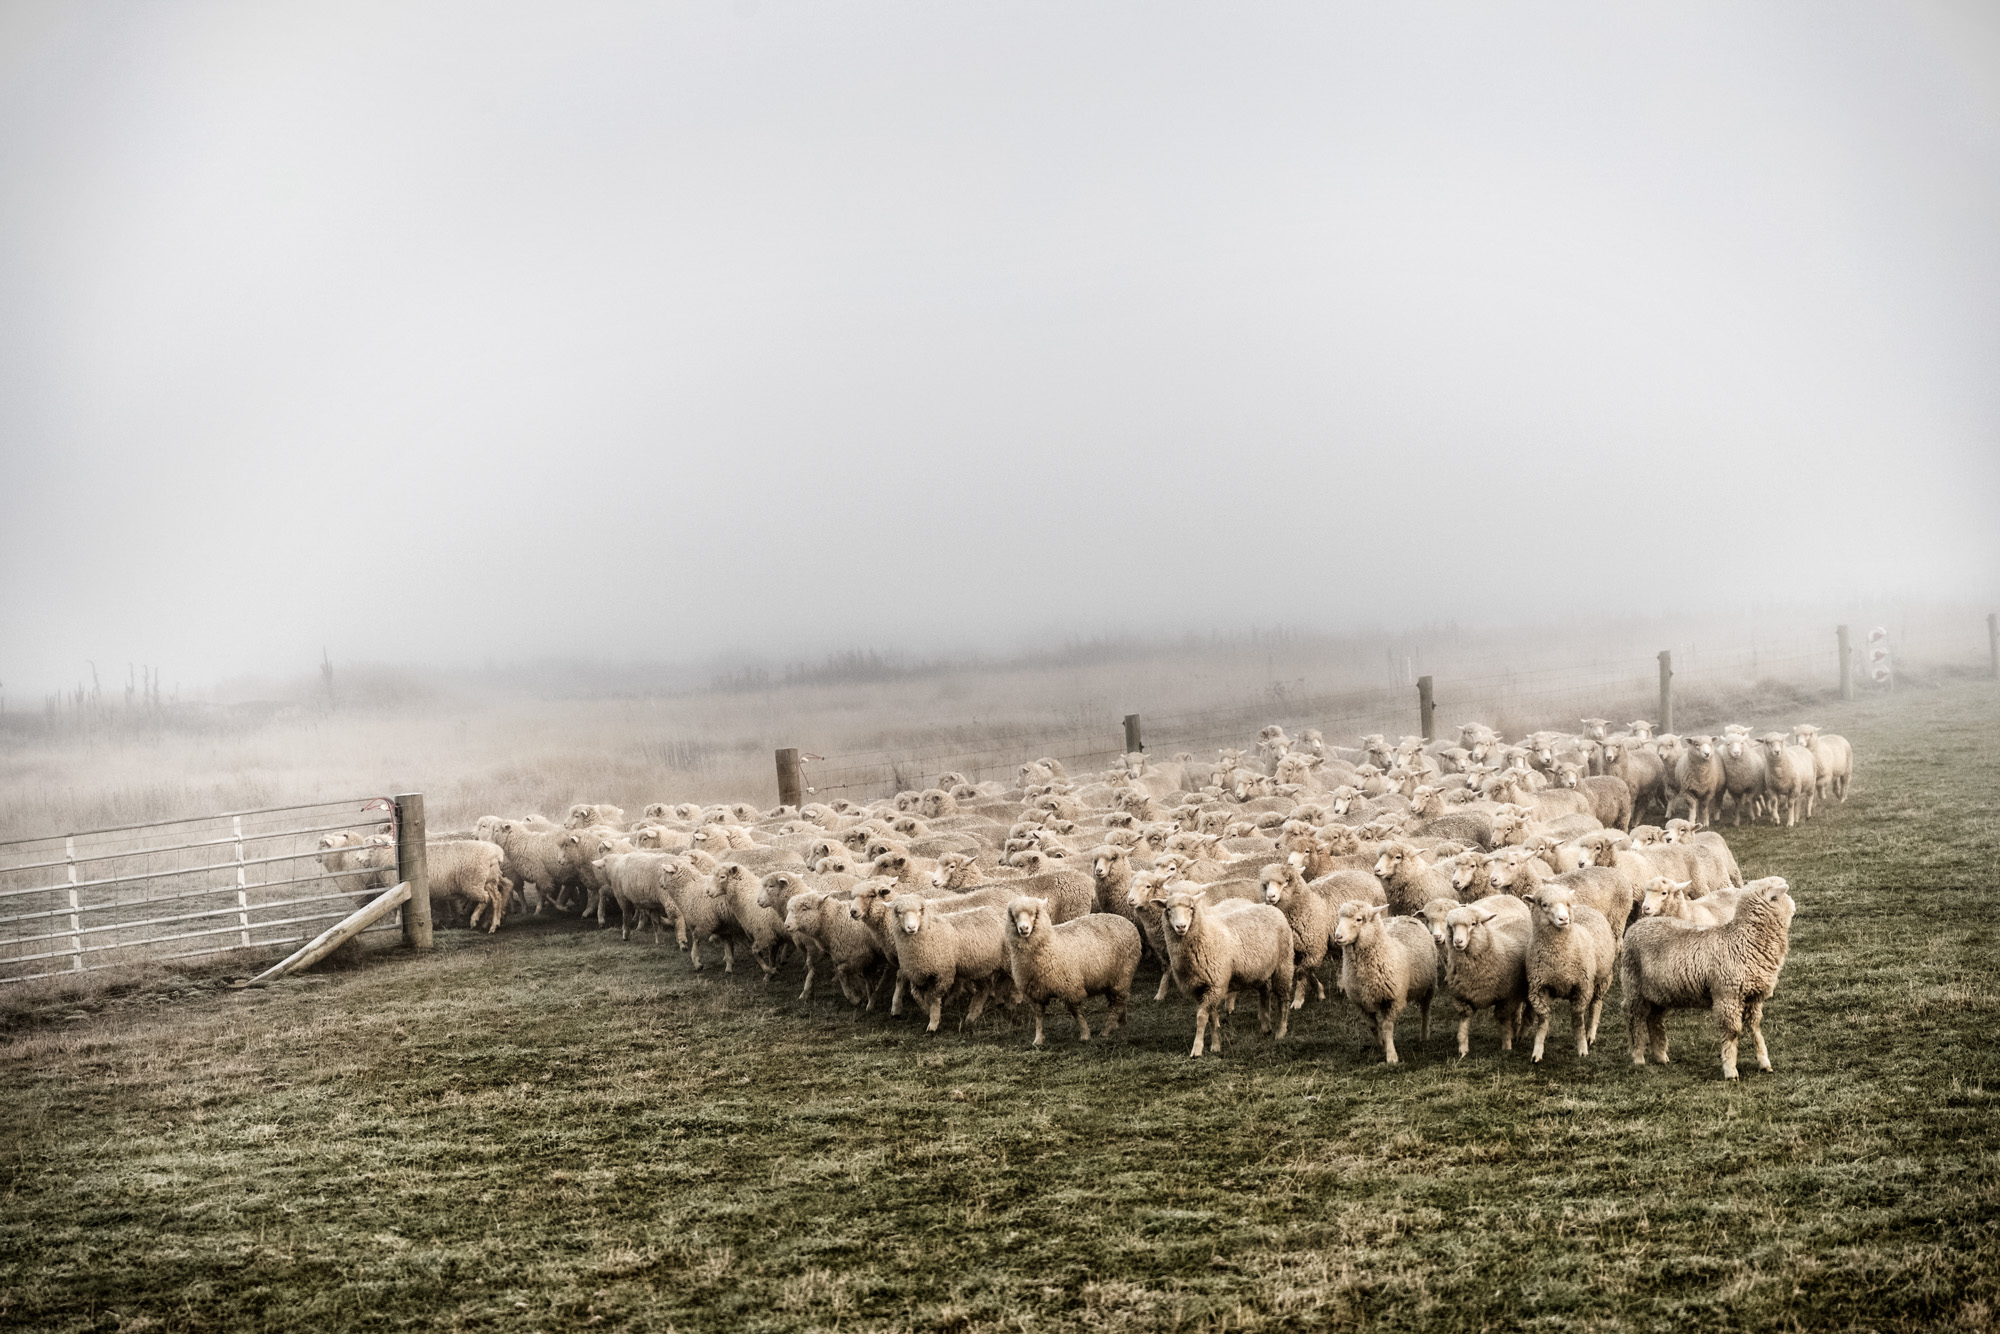 flock of sheep on a foggy morning in New zealand with green grass and fence and foggy background